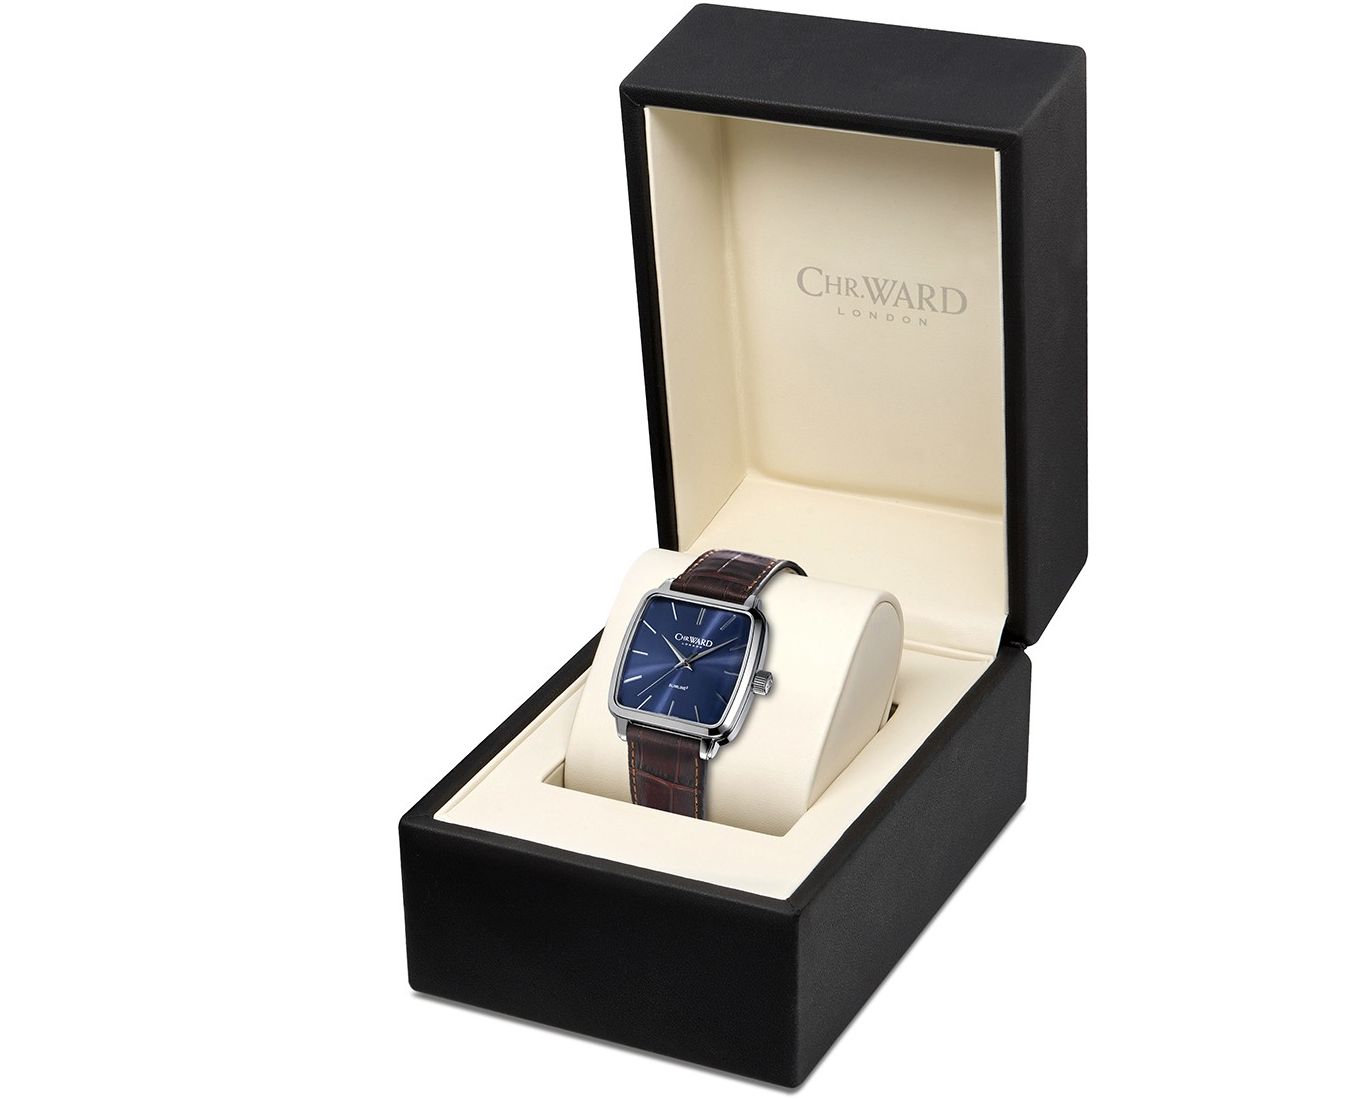 As usual, the Chr. Ward C5 Malvern Slimline Square is offered in a nice presentation box